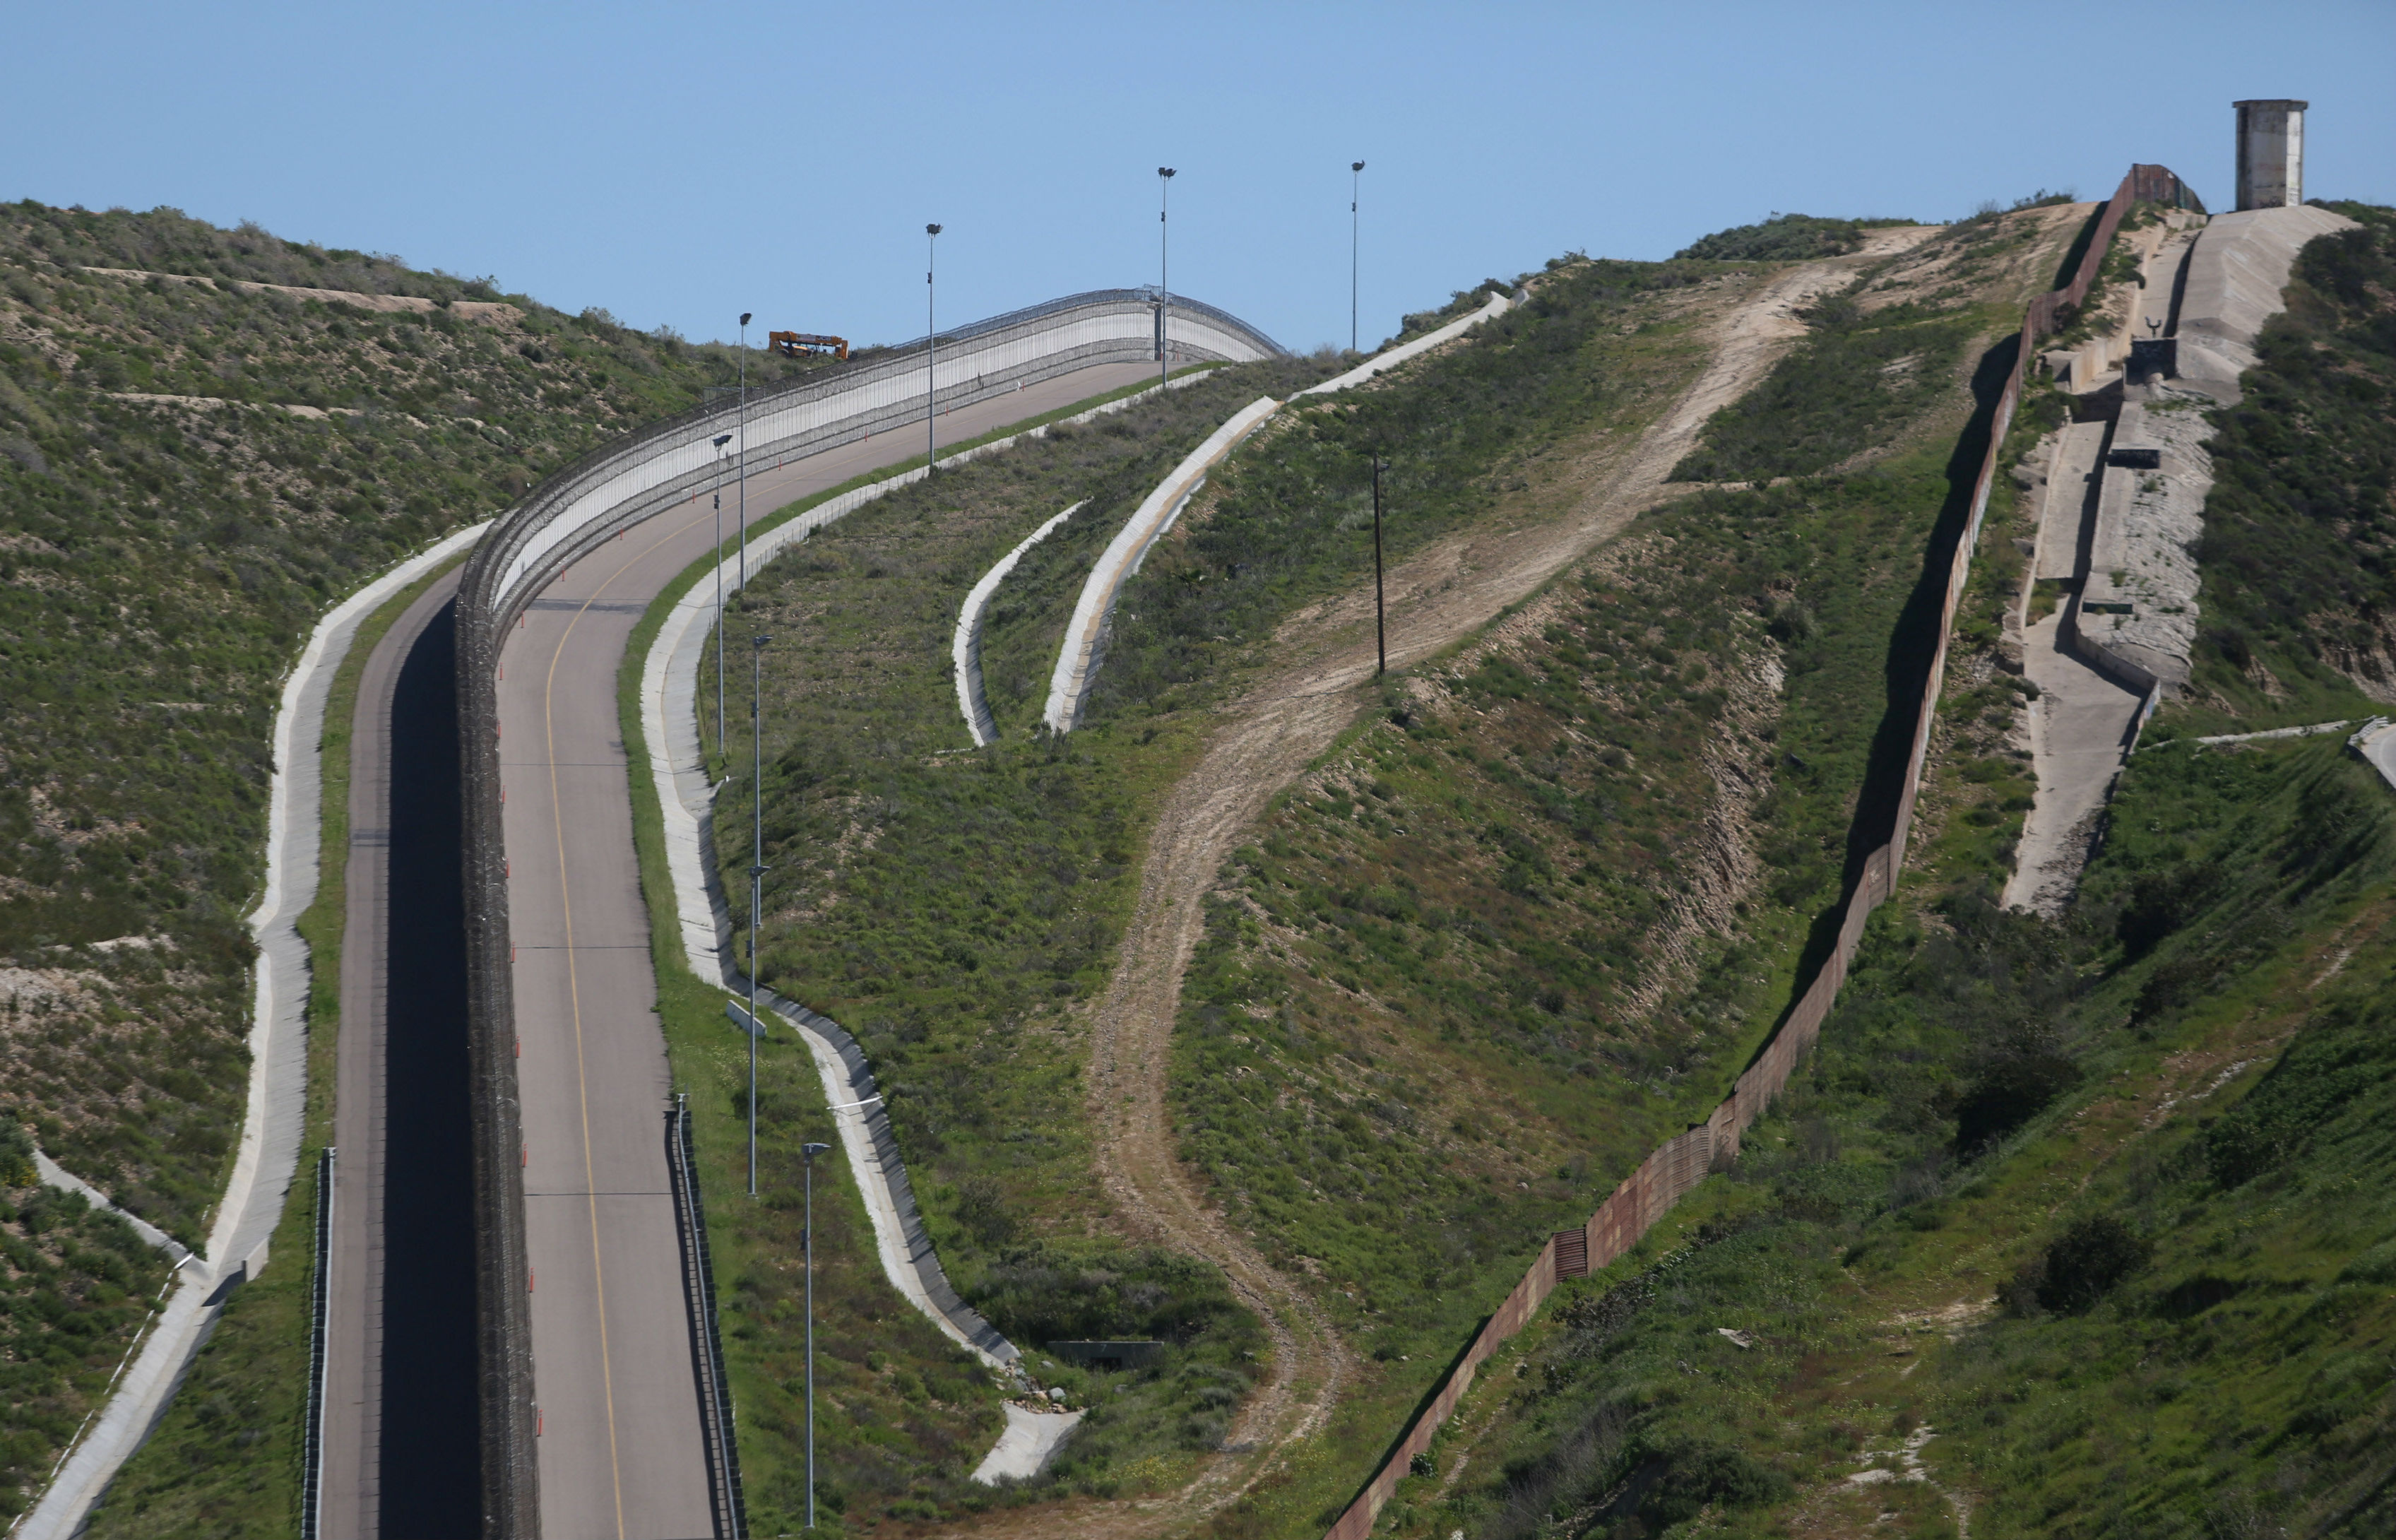 Companies that help build Trump's border wall are 'traitors to the homeland', says Archdiocese of Mexico